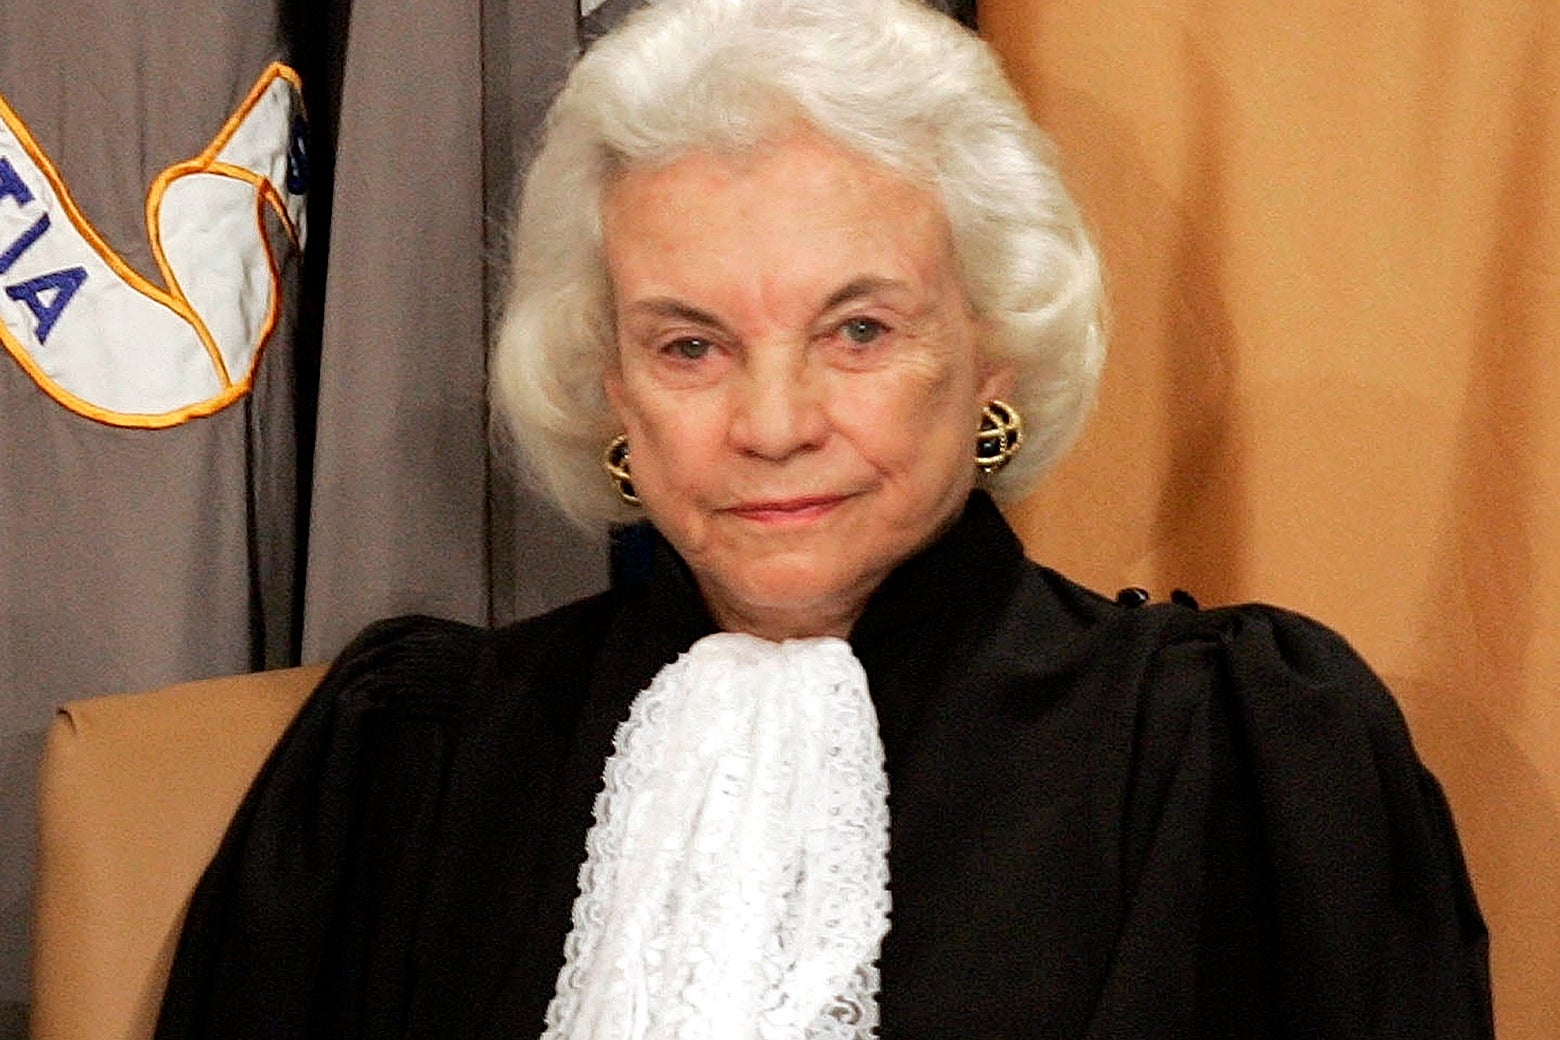 What Sandra Day O’Connor Did as the Swing Vote on the High Court Dahlia Lithwick